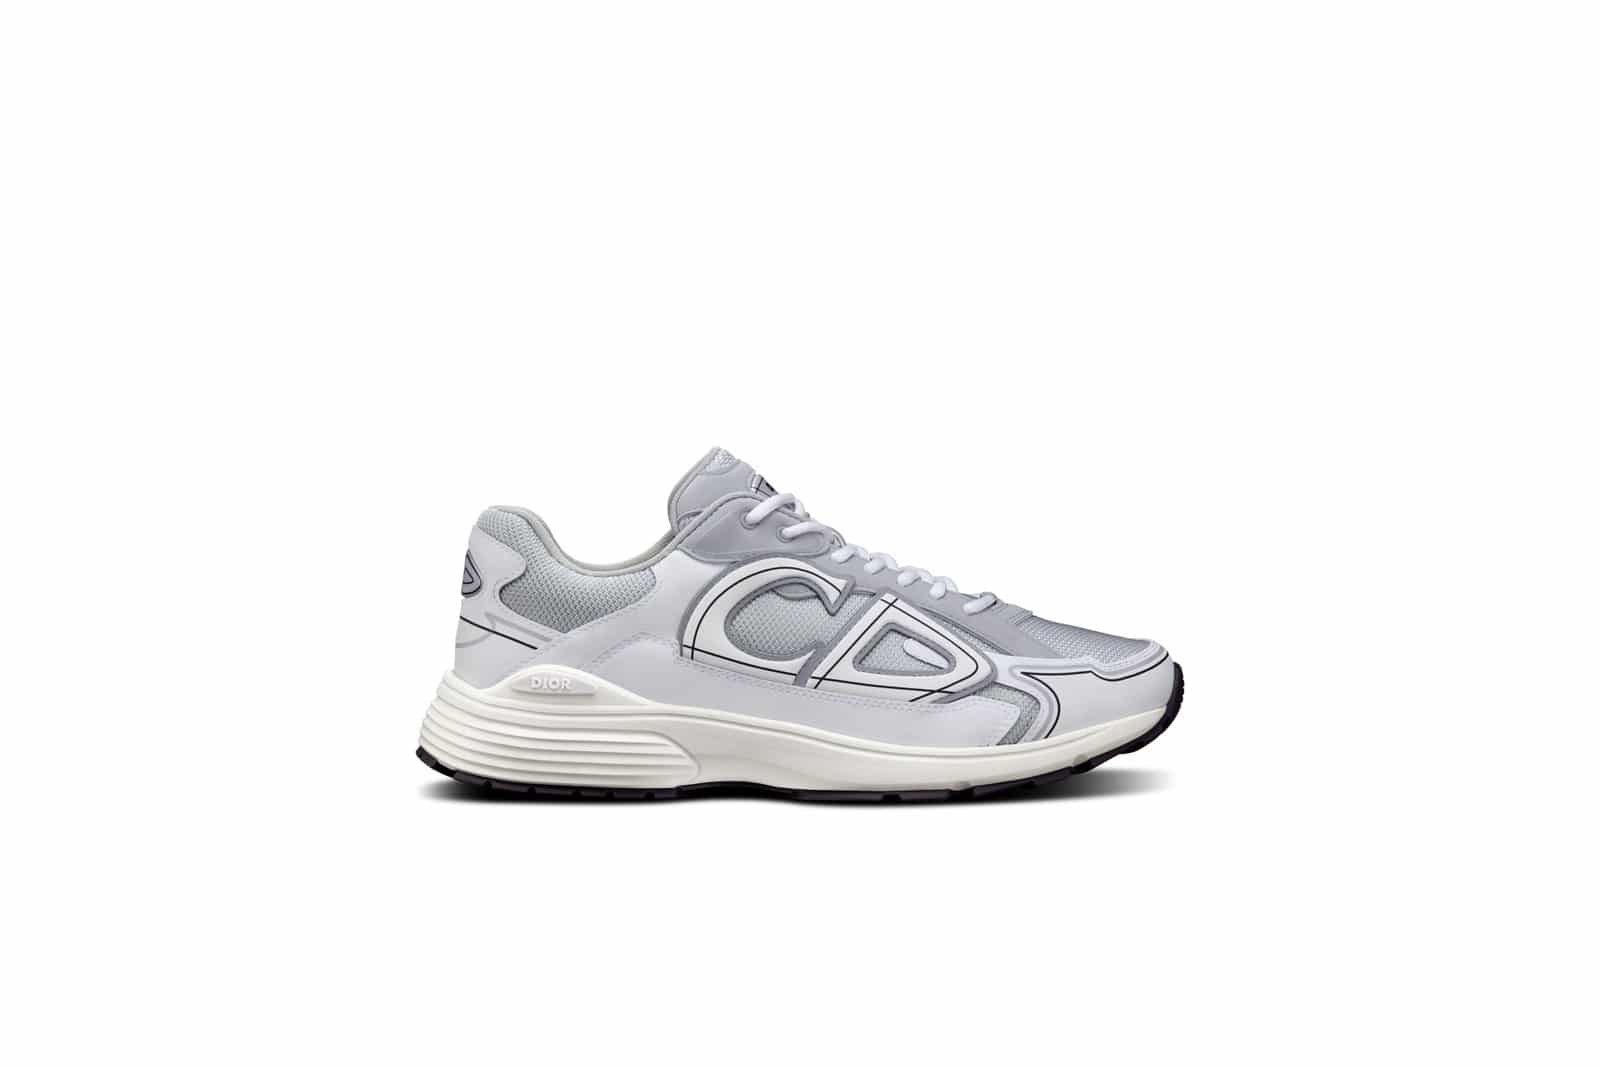 Dior b22 reflective  Dior shoes, Dior sneakers, Dior b22 outfit men